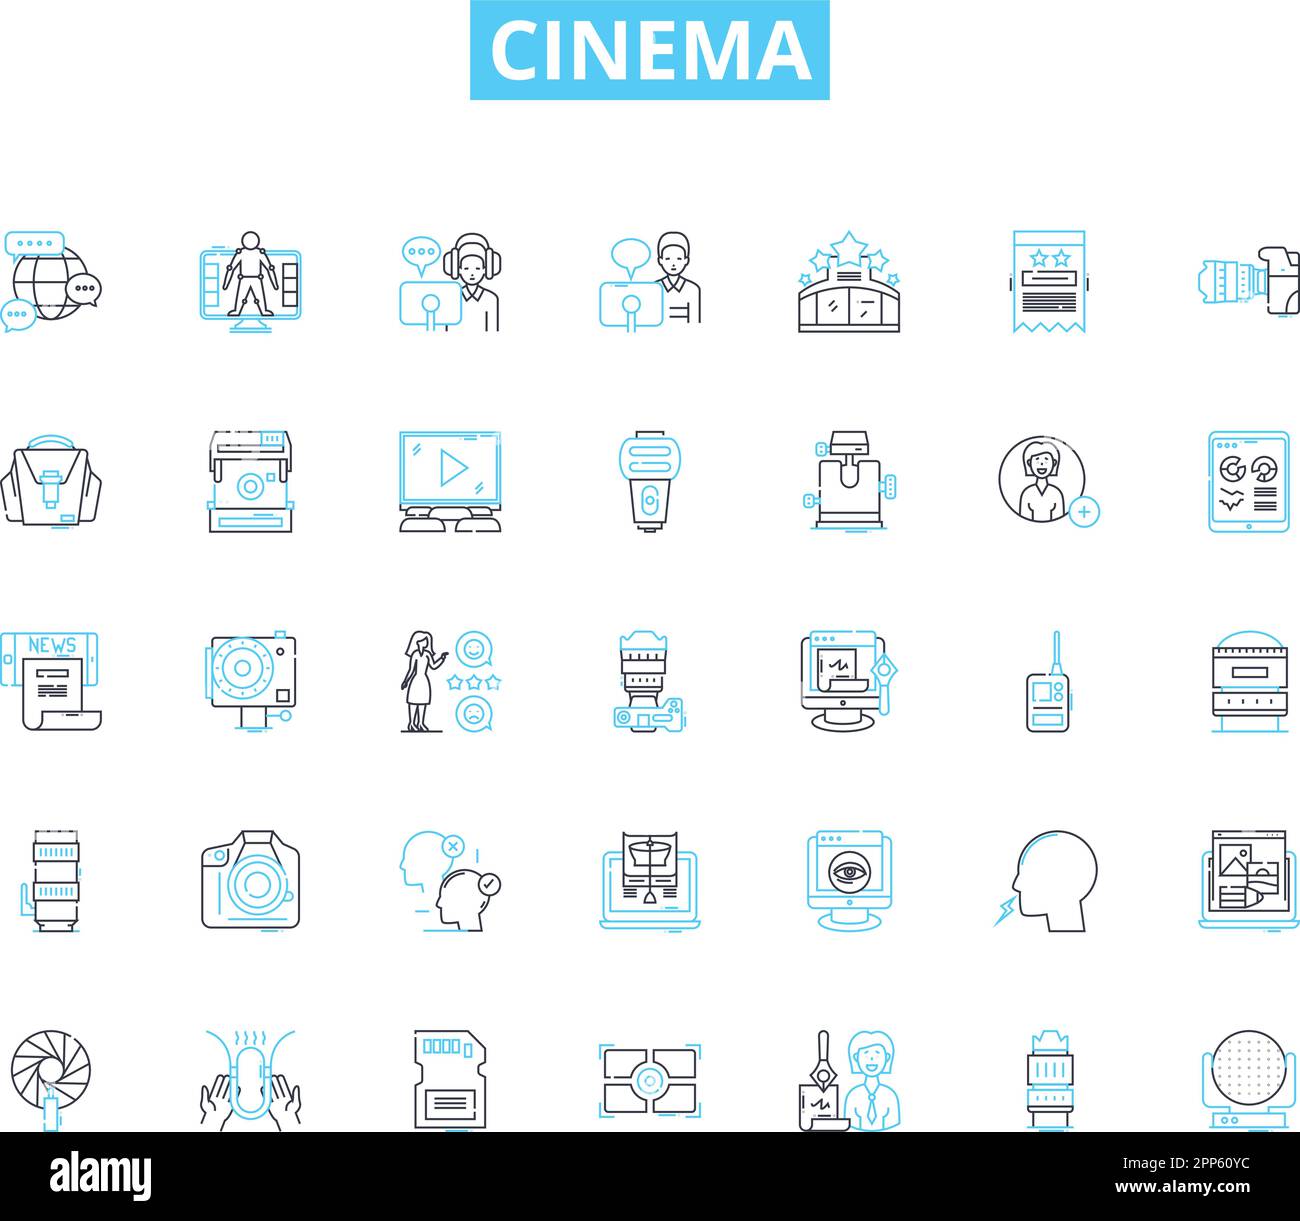 Cinema linear icons set. Film, Action, Drama, Comedy, Romance, Thriller, Horror line vector and concept signs. Adventure,Sci-fi,Fantasy outline Stock Vector